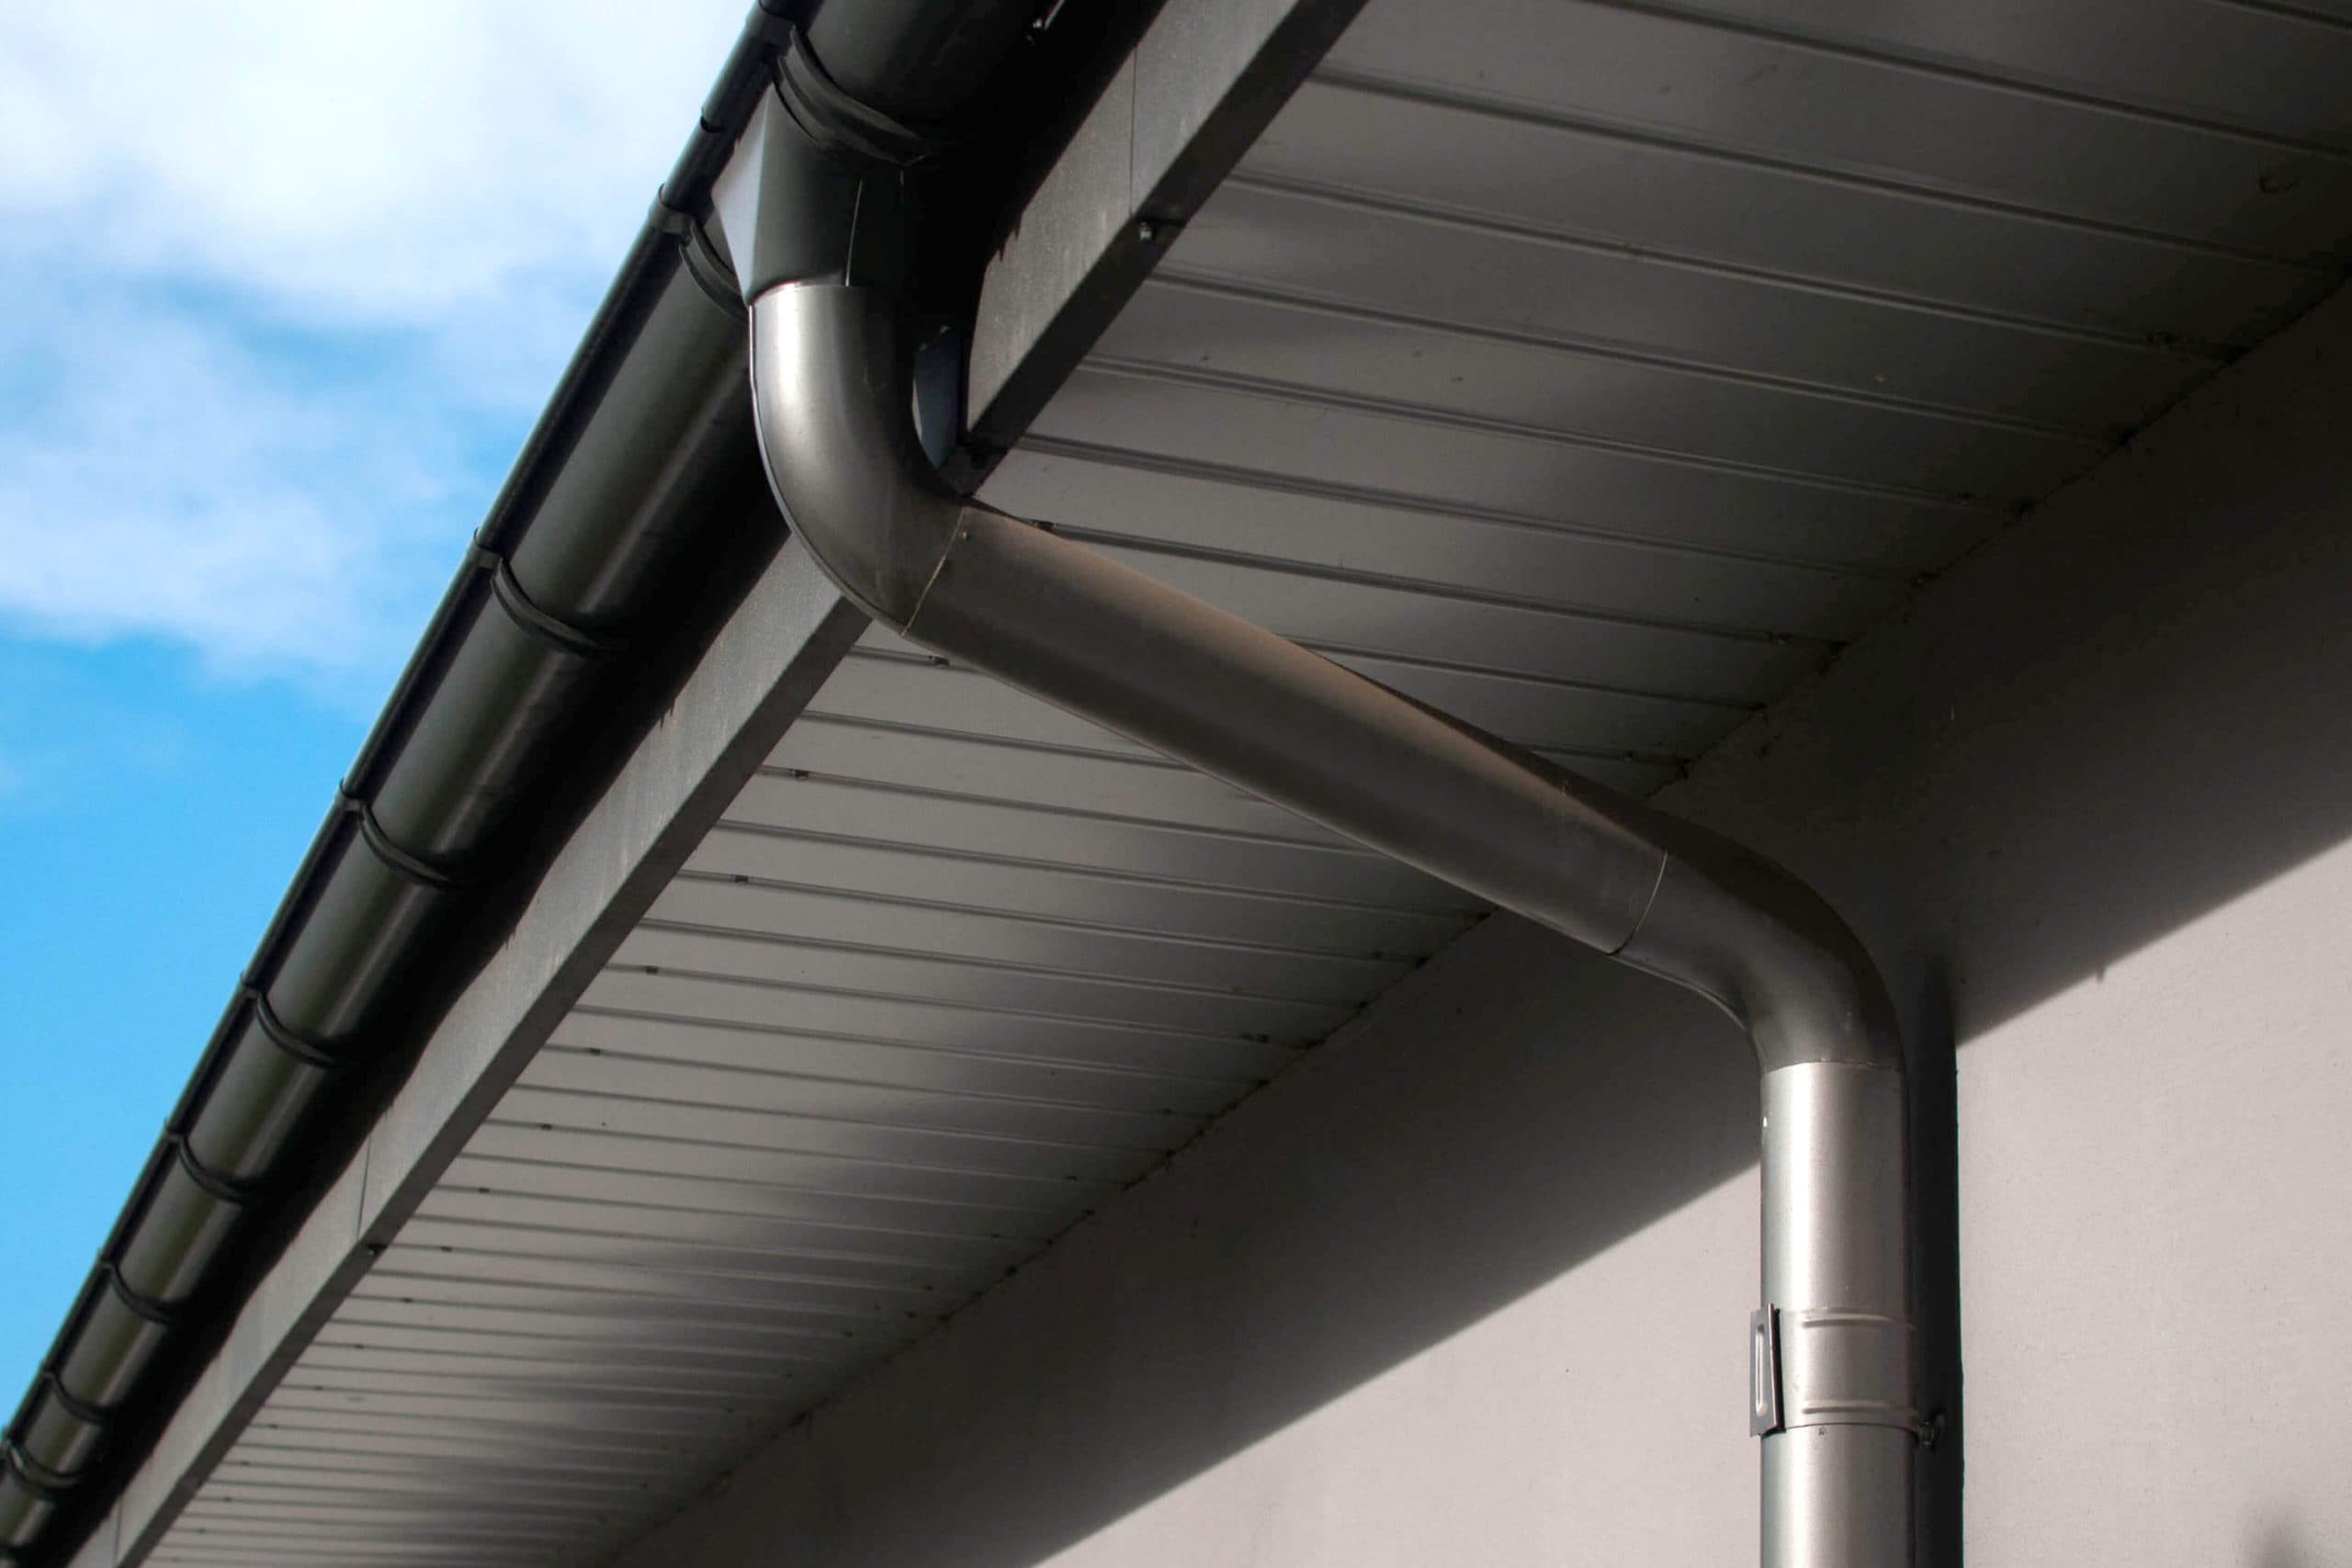 Reliable and affordable Galvanized gutters installation in Omaha